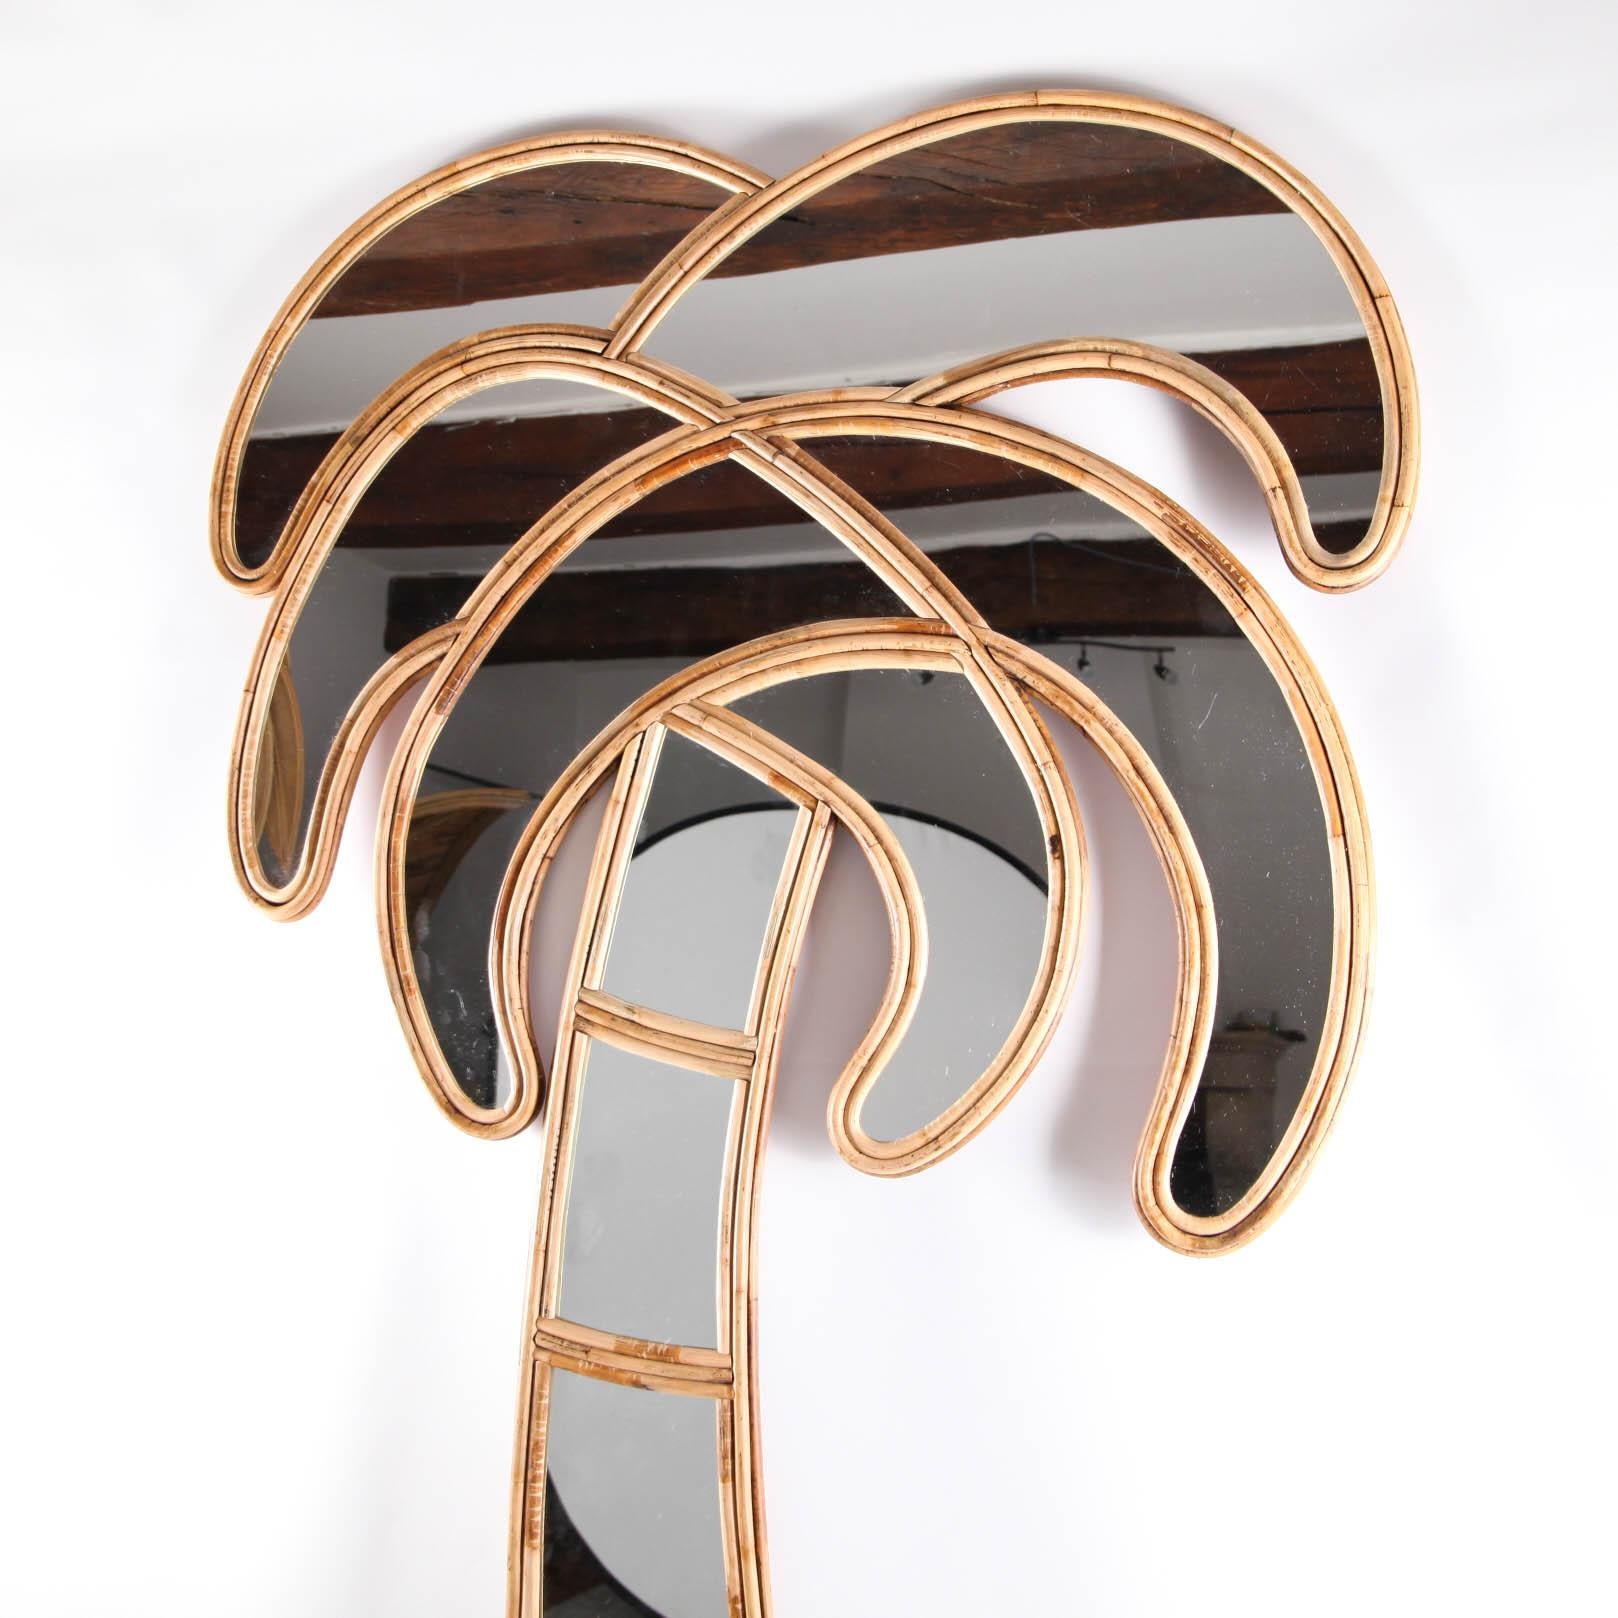 Large hand made rattan palm tree mirror.
Also available in a set of 2 (left and right).